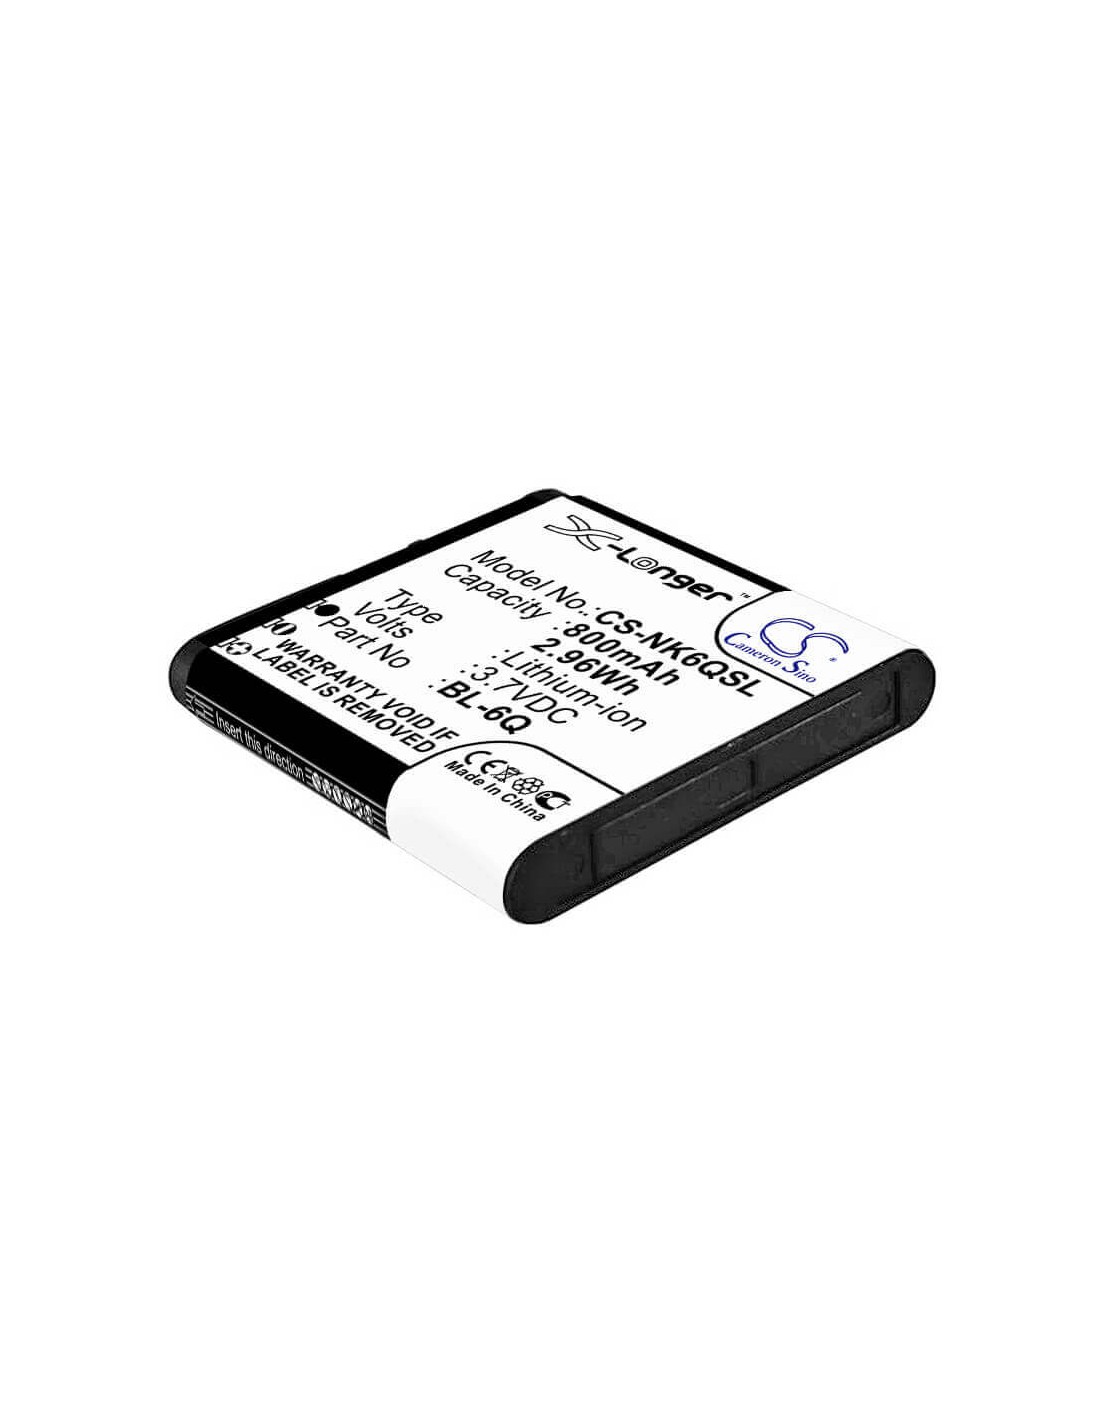 Battery for Nokia 6700 Classic, 6700 classic Illuvial 3.7V, 950mAh - 3.52Wh